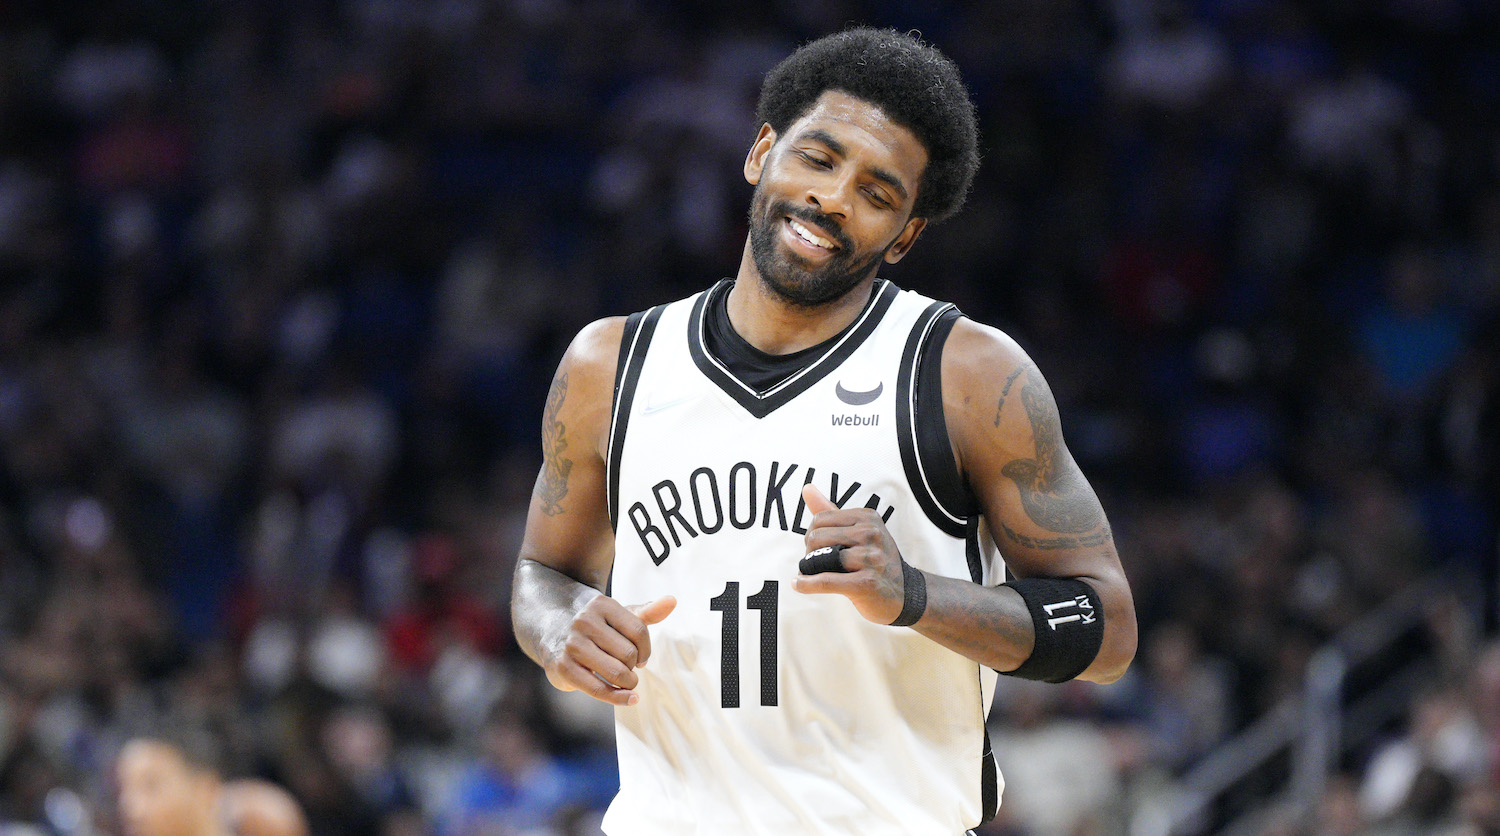 ORLANDO, FLORIDA - MARCH 15: Kyrie Irving #11 of the Brooklyn Nets reacts after scoring against the Orlando Magic in the second half at Amway Center on March 15, 2022 in Orlando, Florida. NOTE TO USER: User expressly acknowledges and agrees that, by downloading and or using this photograph, User is consenting to the terms and conditions of the Getty Images License Agreement. (Photo by Mark Brown/Getty Images)